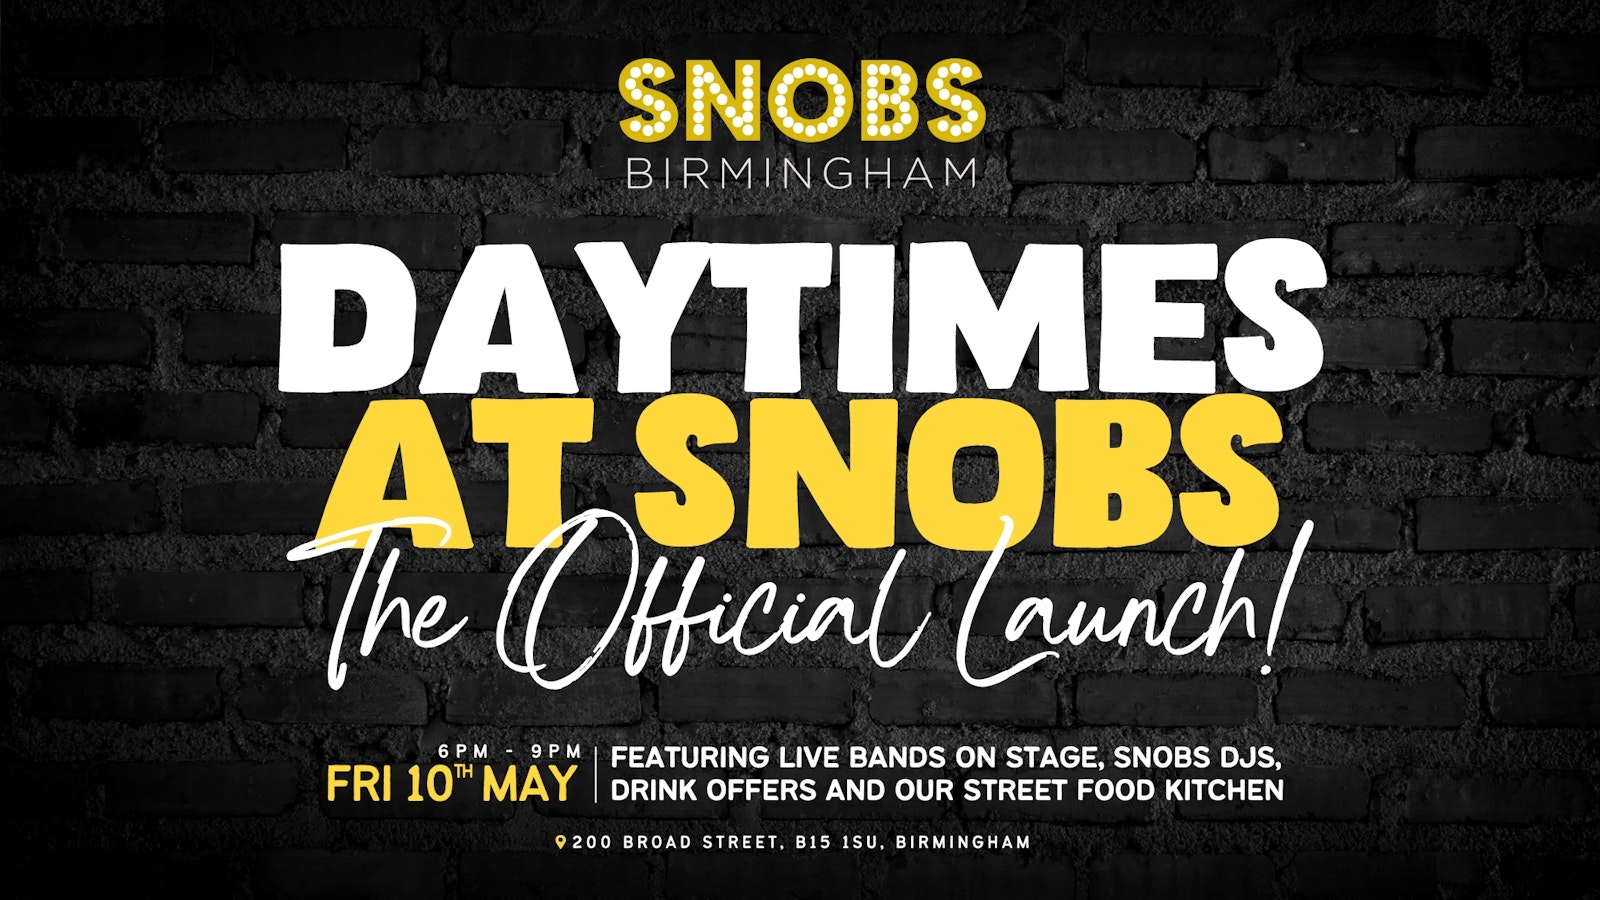 DAYTIMES AT SNOBS : THE OFFICIAL LAUNCH!! (10th May)